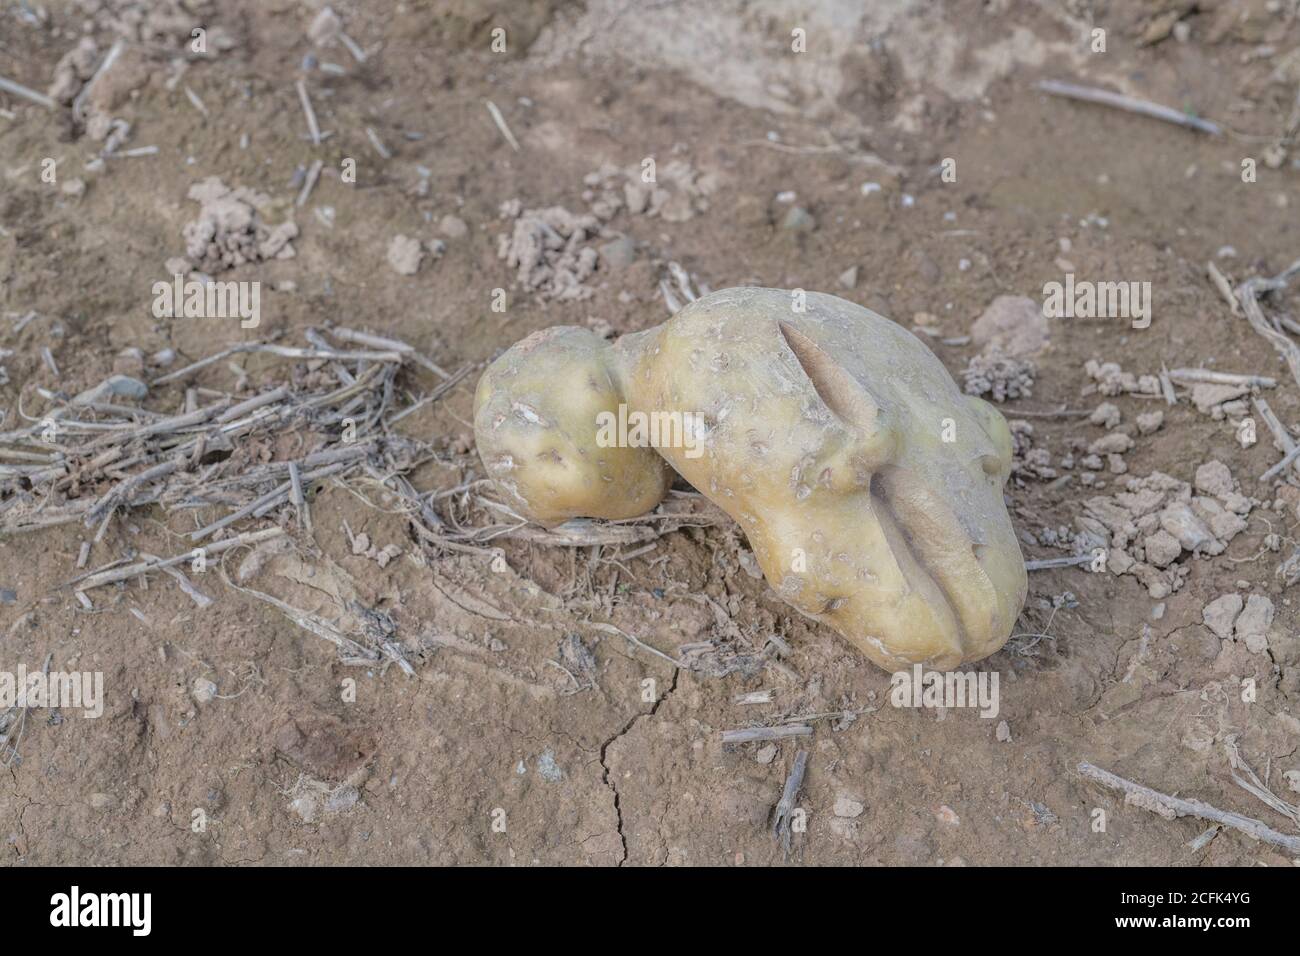 Damaged potato crop / potato tuber. Discarded cropped potato showing growth cracks, physiological deformation which form during the growing season. Stock Photo